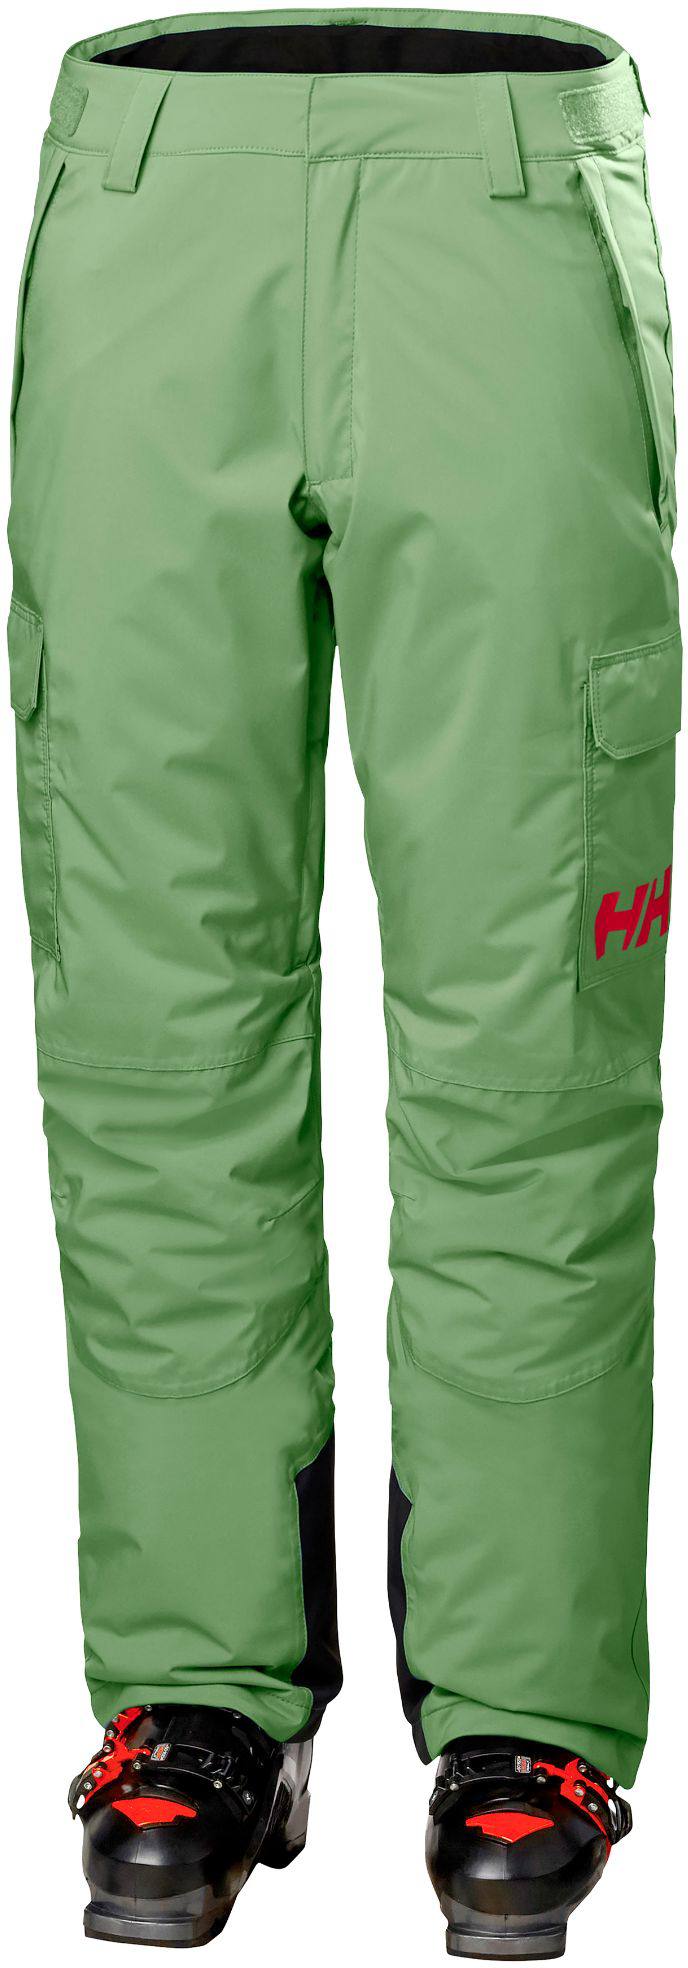 Women’s Switch Cargo Insulated Pant Jade M